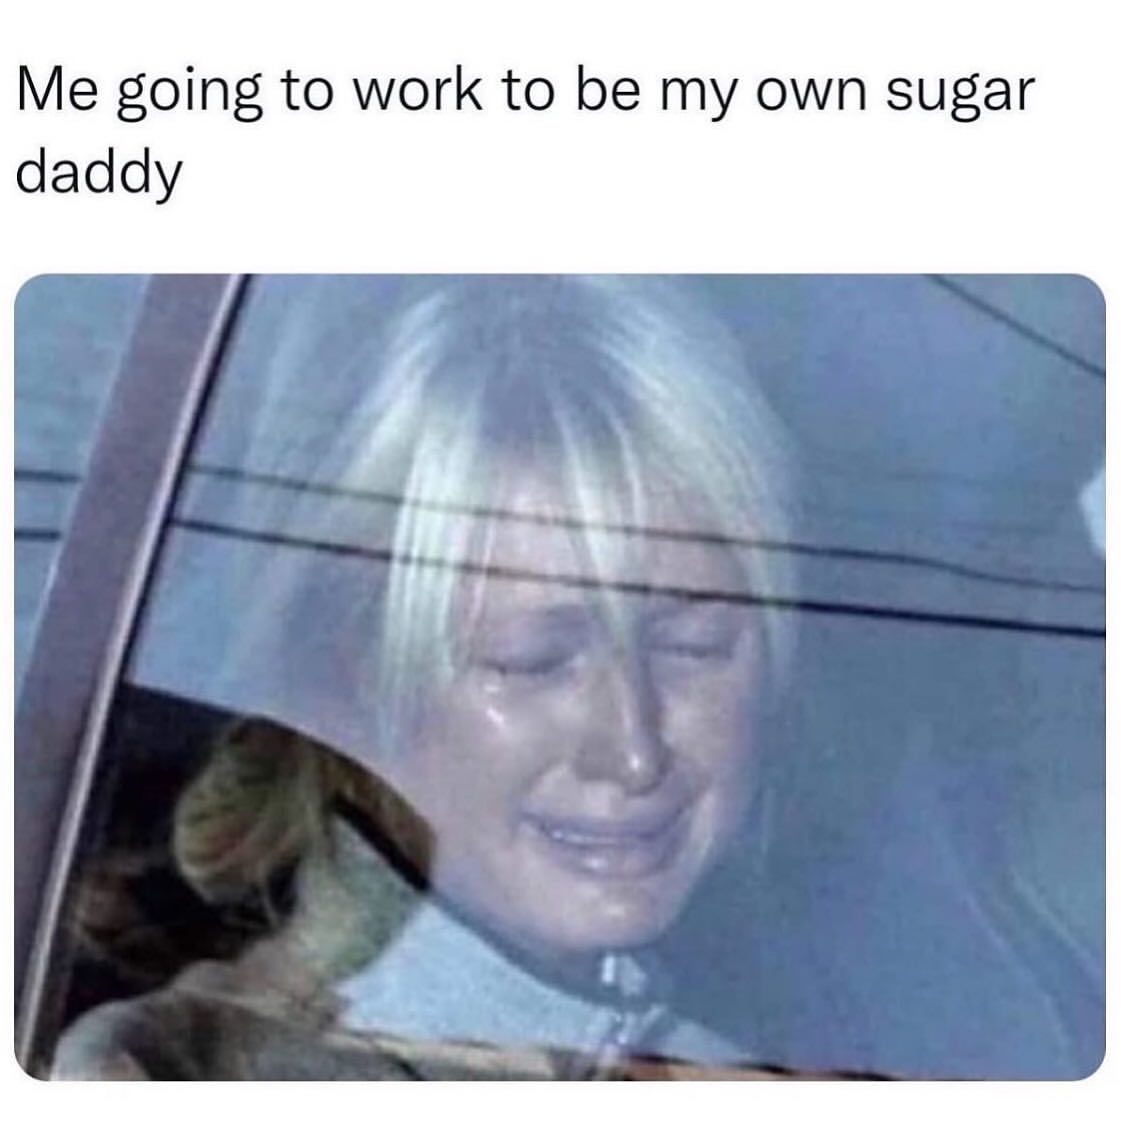 Me going to work to be my own sugar daddy.